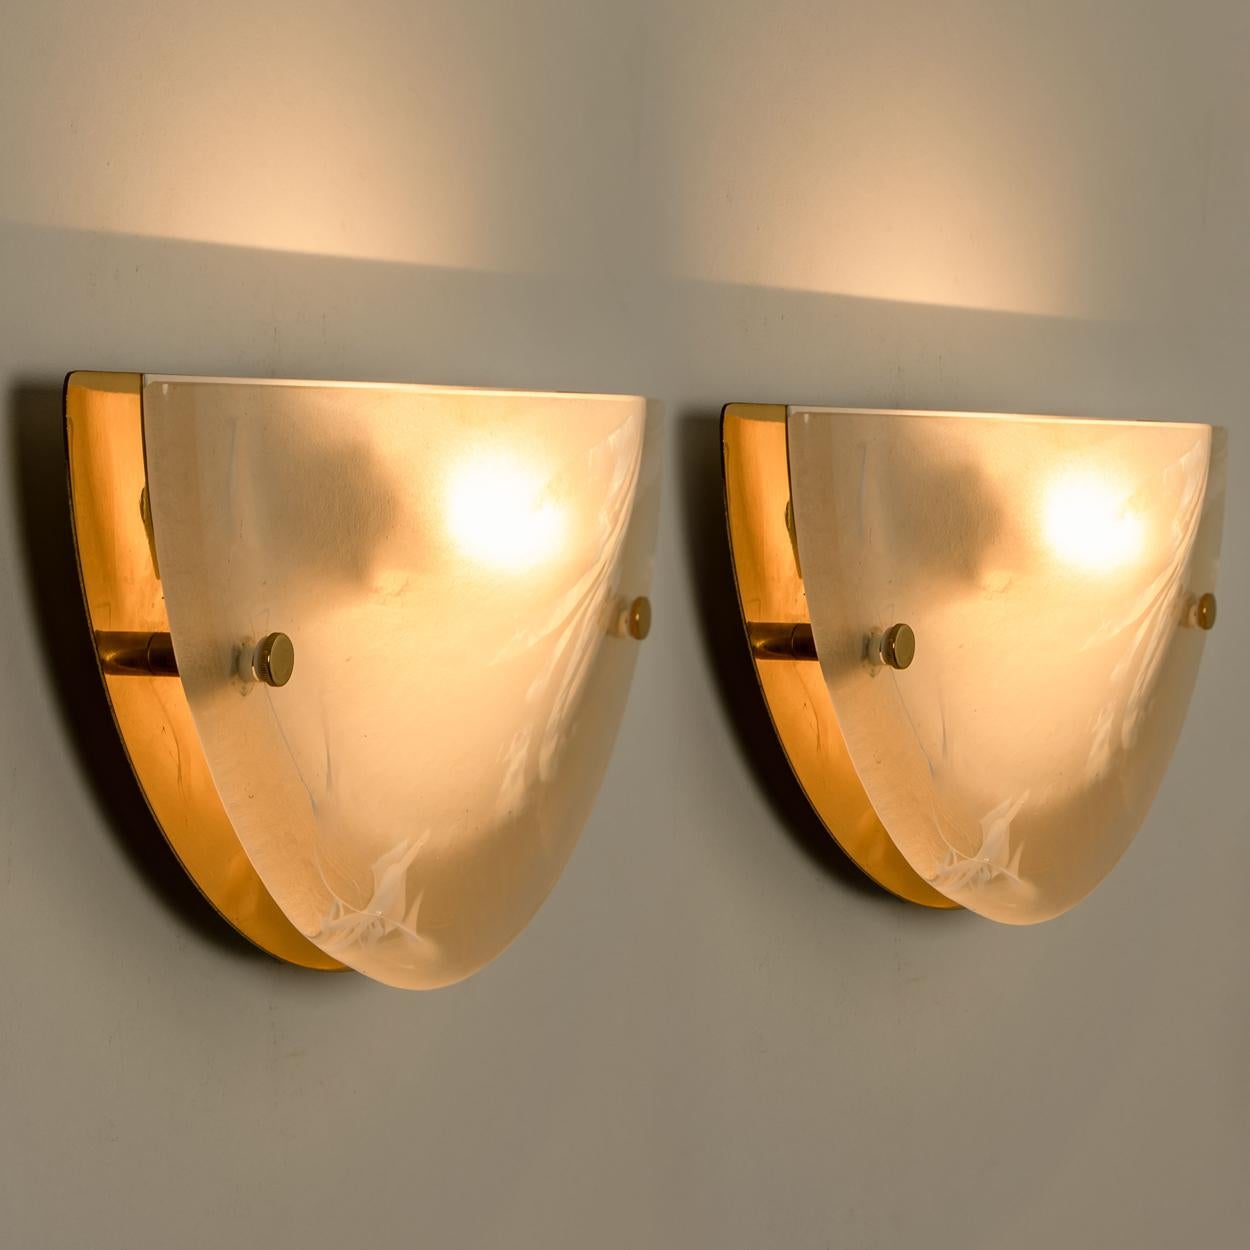 A pair of high quality modern thick textured ice glass flush mount or wall lights by Hillebrand, circa 1975.

Each light fixture is featuring a huge round blown half glass dish. Minimalistic design executed with a taste for excellence in